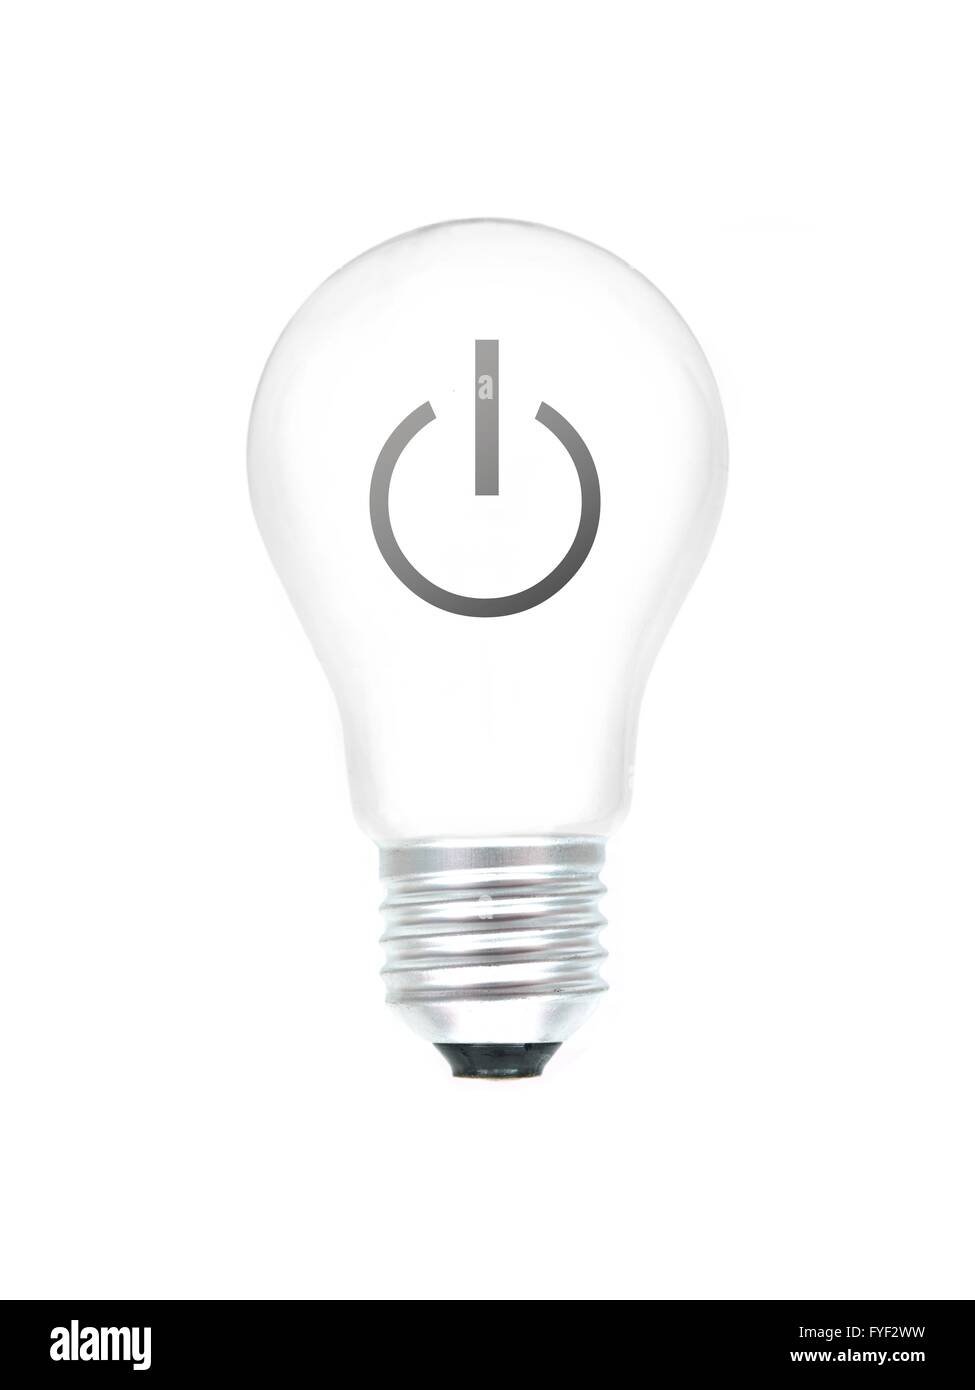 A light bulb with an on switch  isolated against a white background Stock Photo